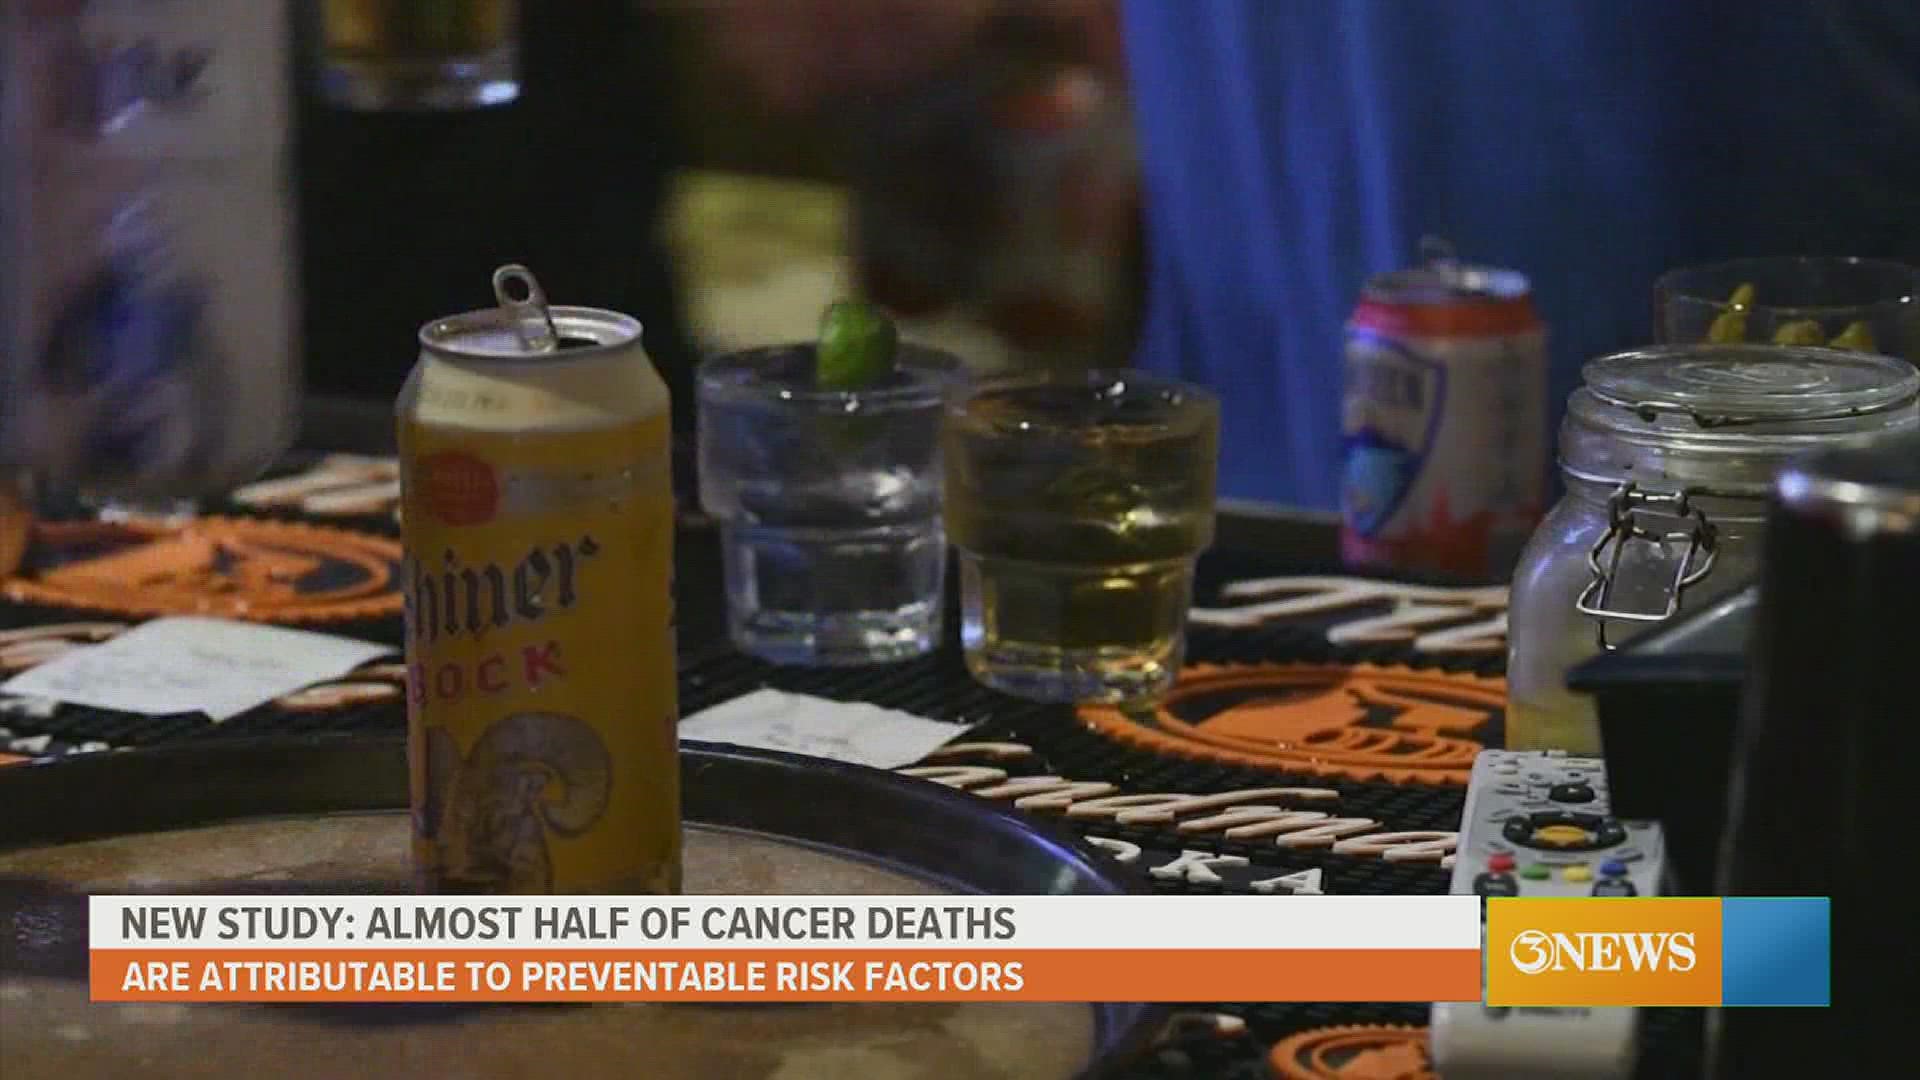 New research suggests nearly half of deaths due to cancer can be attributed to preventable factors including smoking, drinking too much alcohol and high BMI.